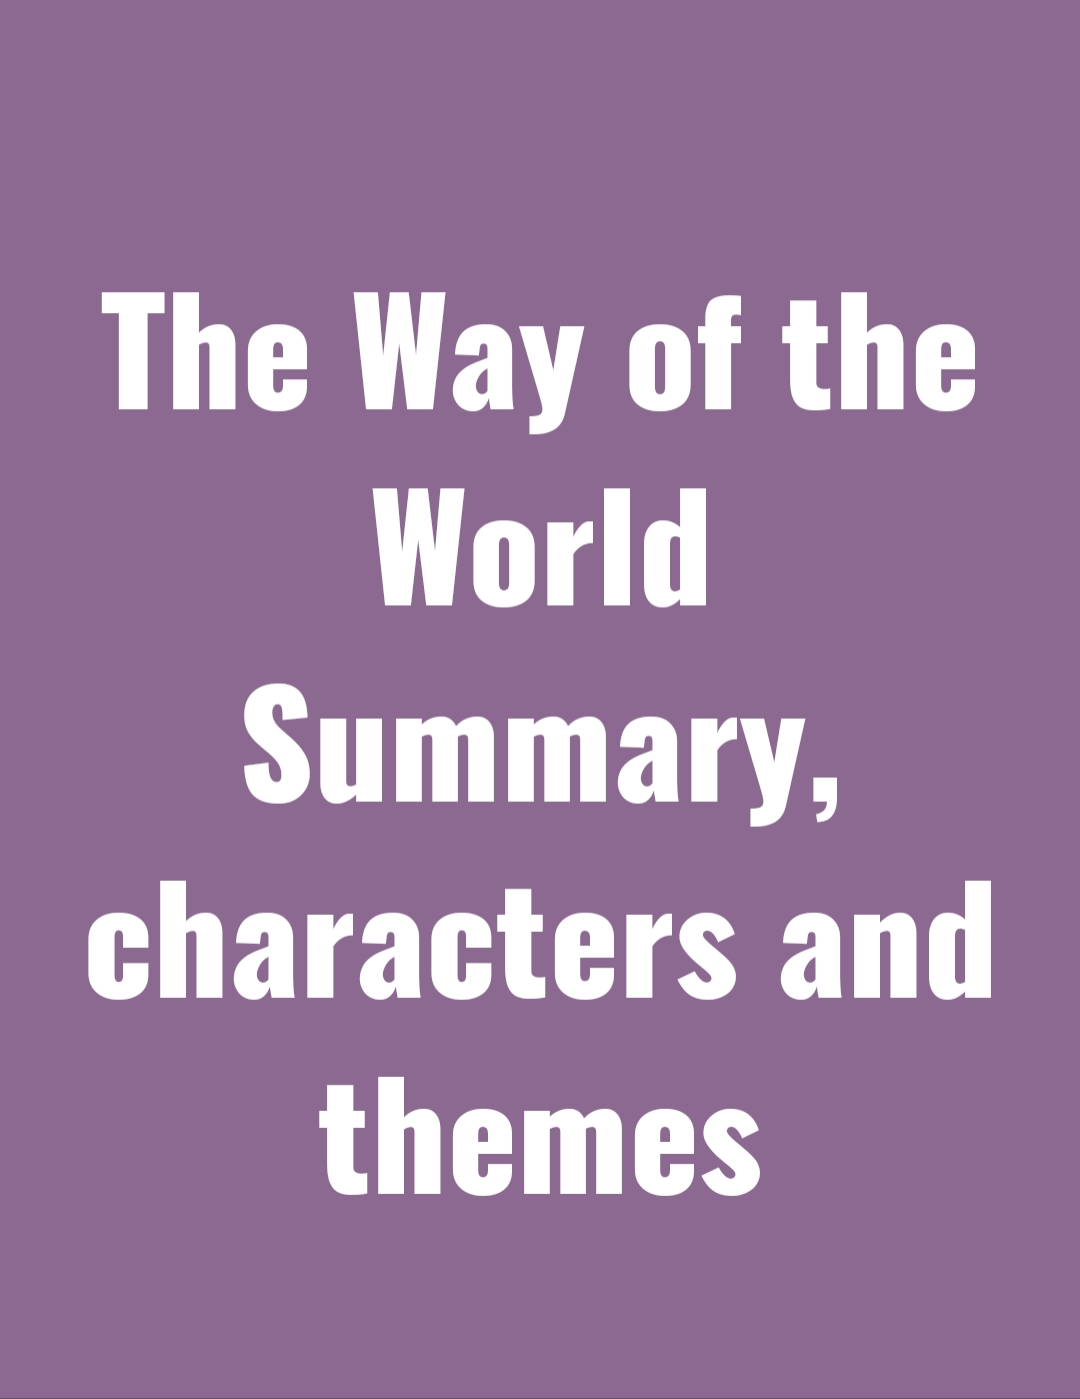 In this assignment we will throw light on The Way of the World summary, themes and characters in detail manners so that you may better understand this play, it is a funny play and can be called a comedy play. First of all, we will discuss The Way of the World summary in detail after its characters and so far as the end themes.